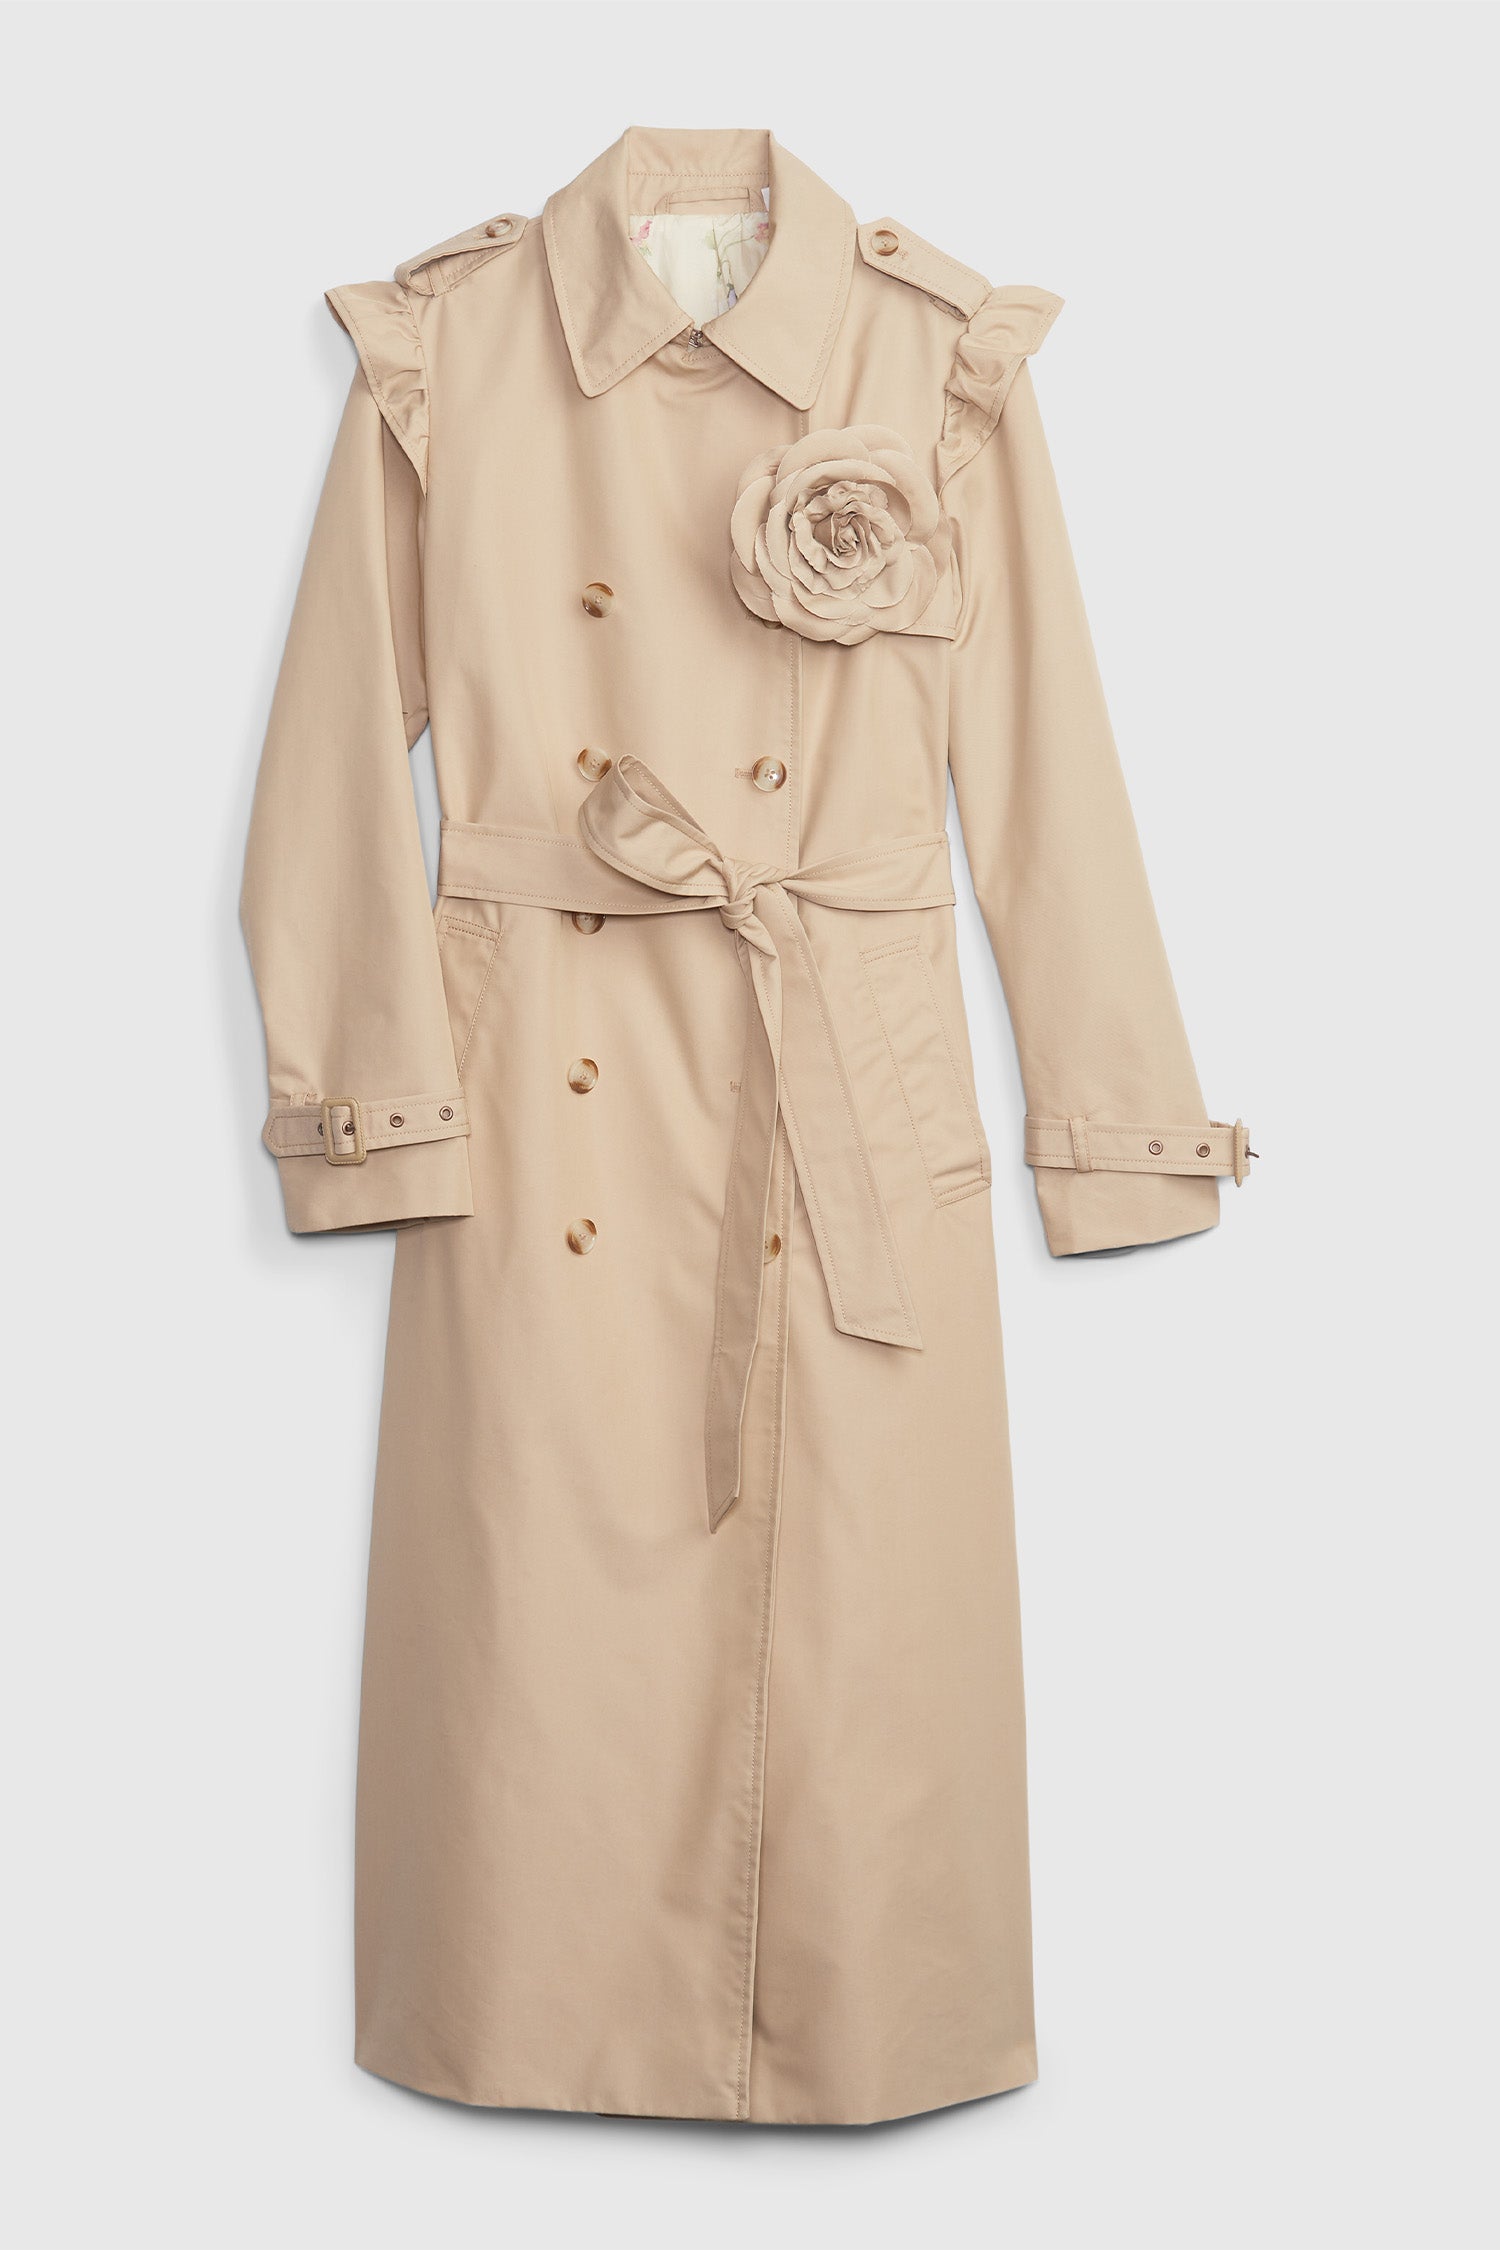 Khaki trench coat with rosette detail on chest, ruffle shoulders, and waist tie